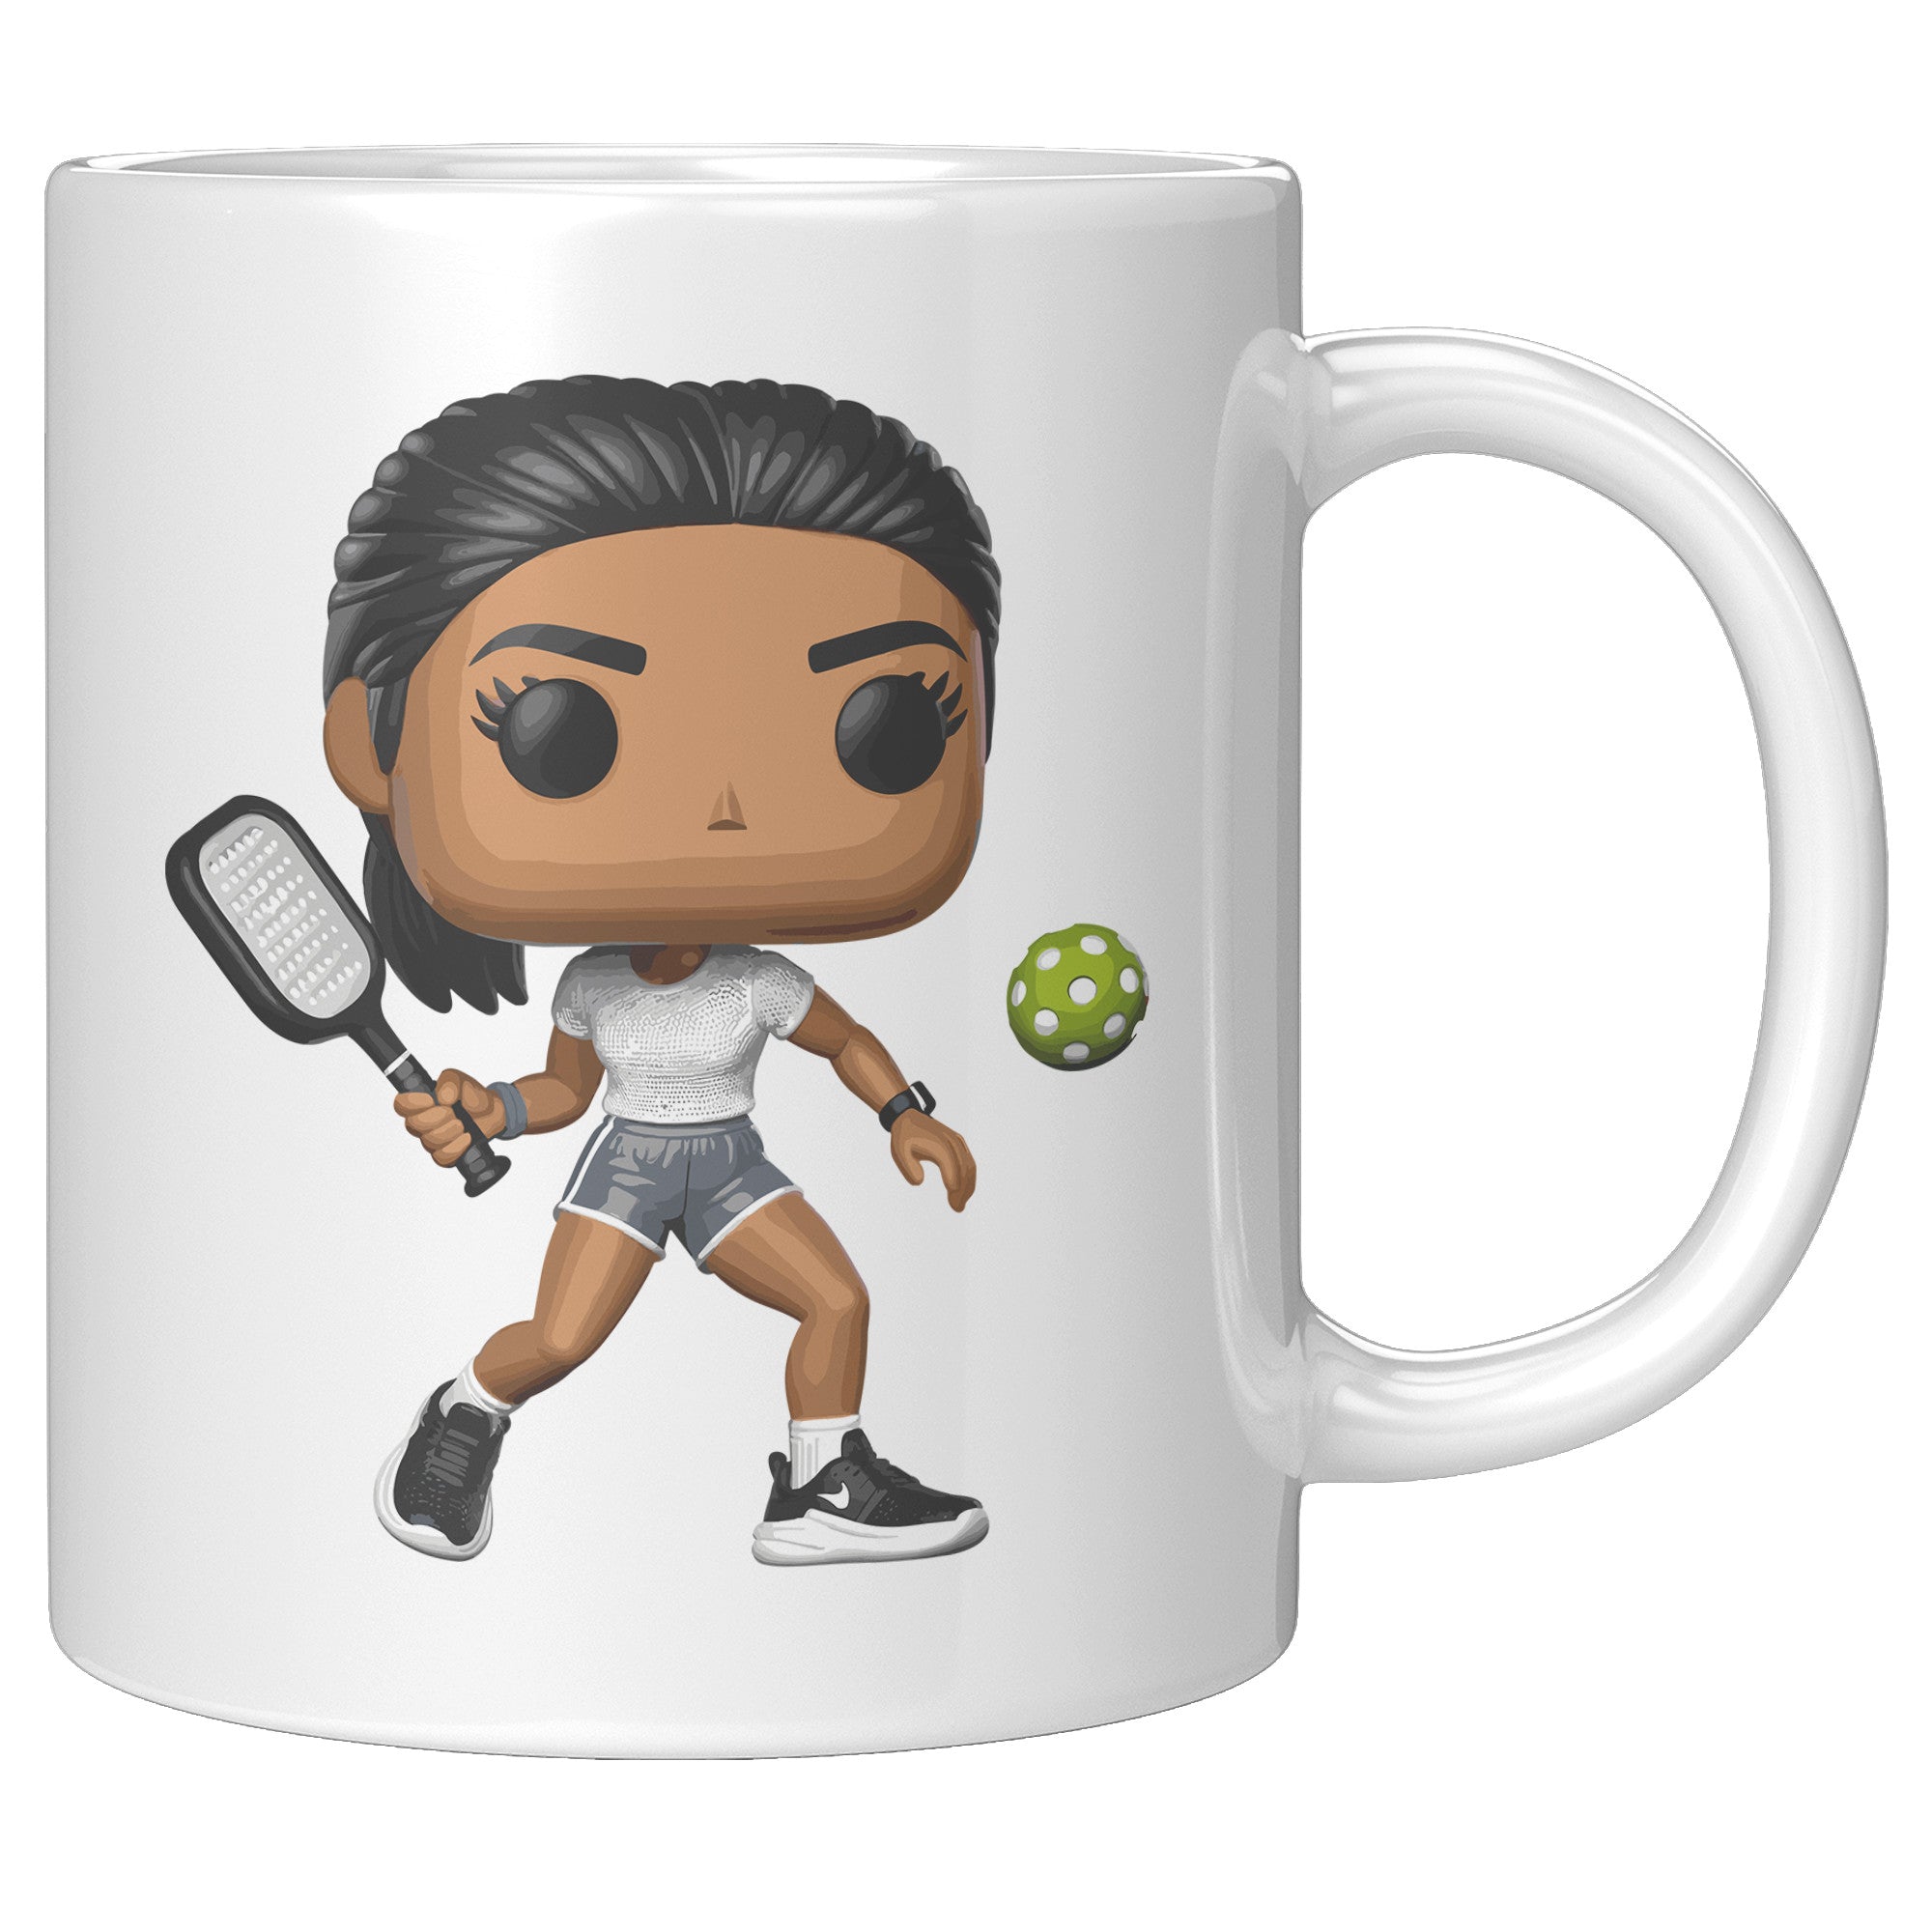 "Funko Pop Style Pickle Ball Player Girl Coffee Mug - Cute Athletic Cup - Perfect Gift for Pickle Ball Enthusiasts - Sporty Chic Apparel" - A